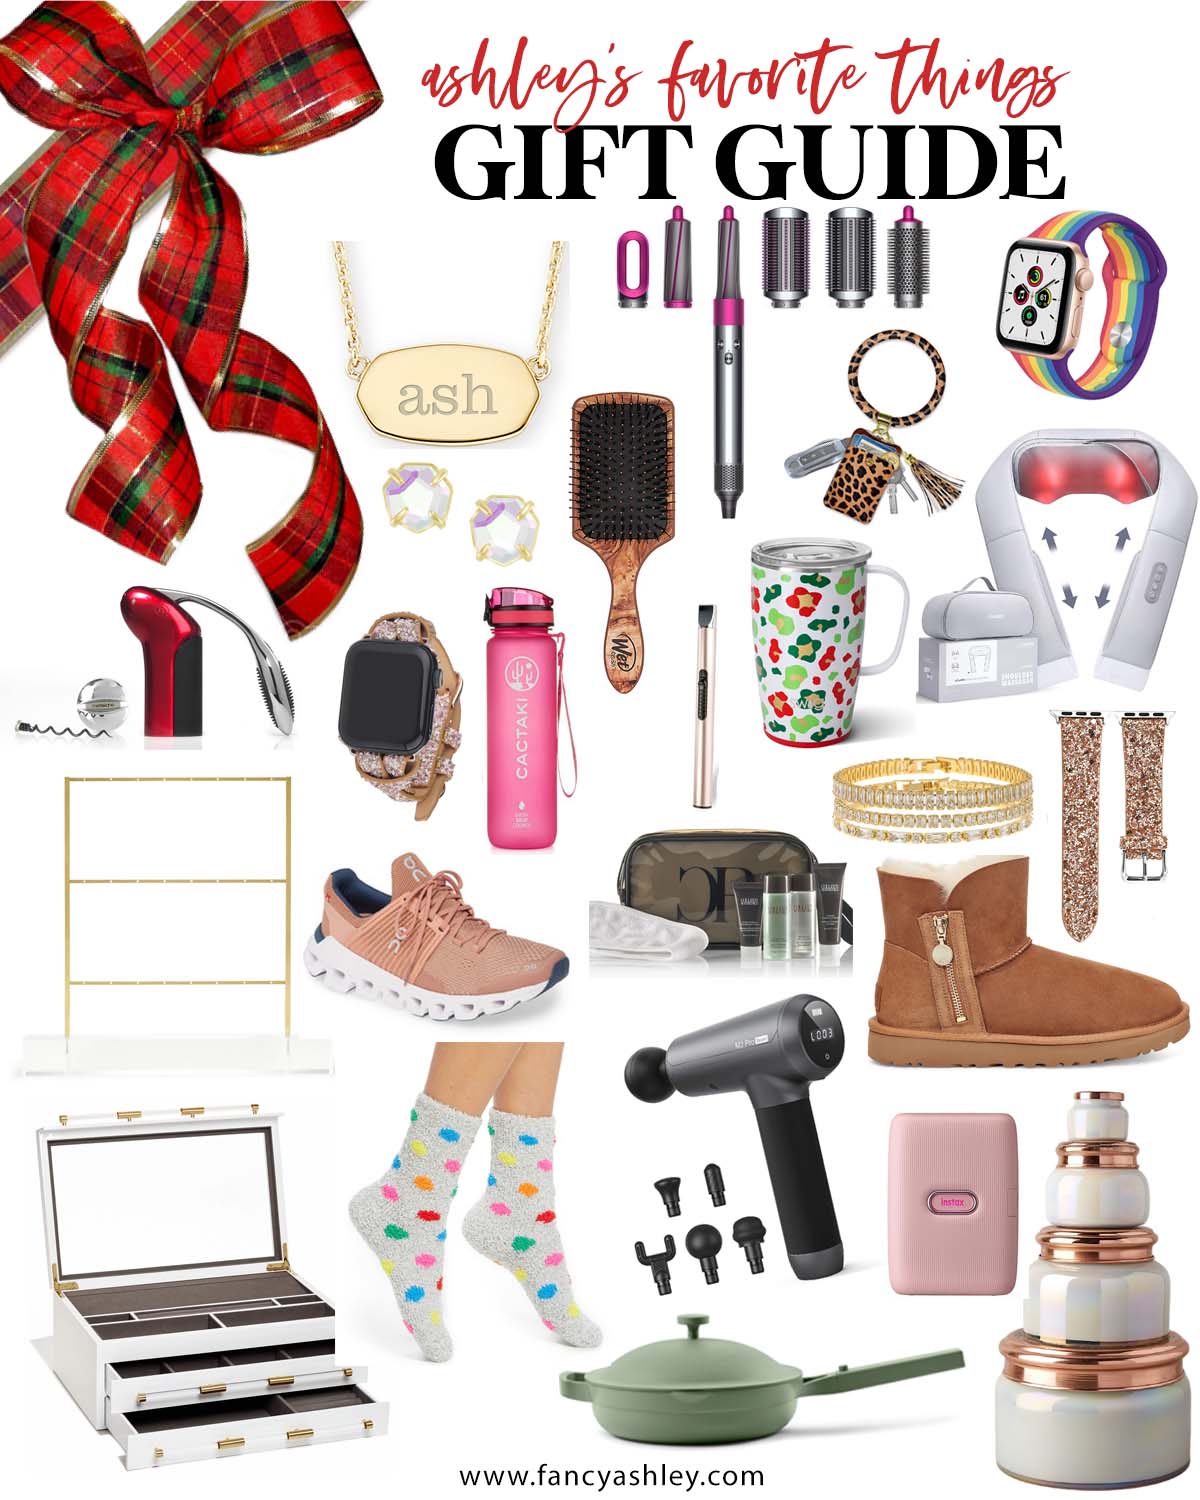 Favorite Things Gift Ideas by popular Houston life and style blog, Fancy Ashley: collage image of personalized necklace, paddle brush, Always pan, ugg boots, apple watch band, neck massager, key ring, Dyson hair tool, massager, storage jars, instax photo printer, jewelry box, rhinestone bracelets, rhinestone stud earrings, travel mug, water bottle, and USB lighter. 